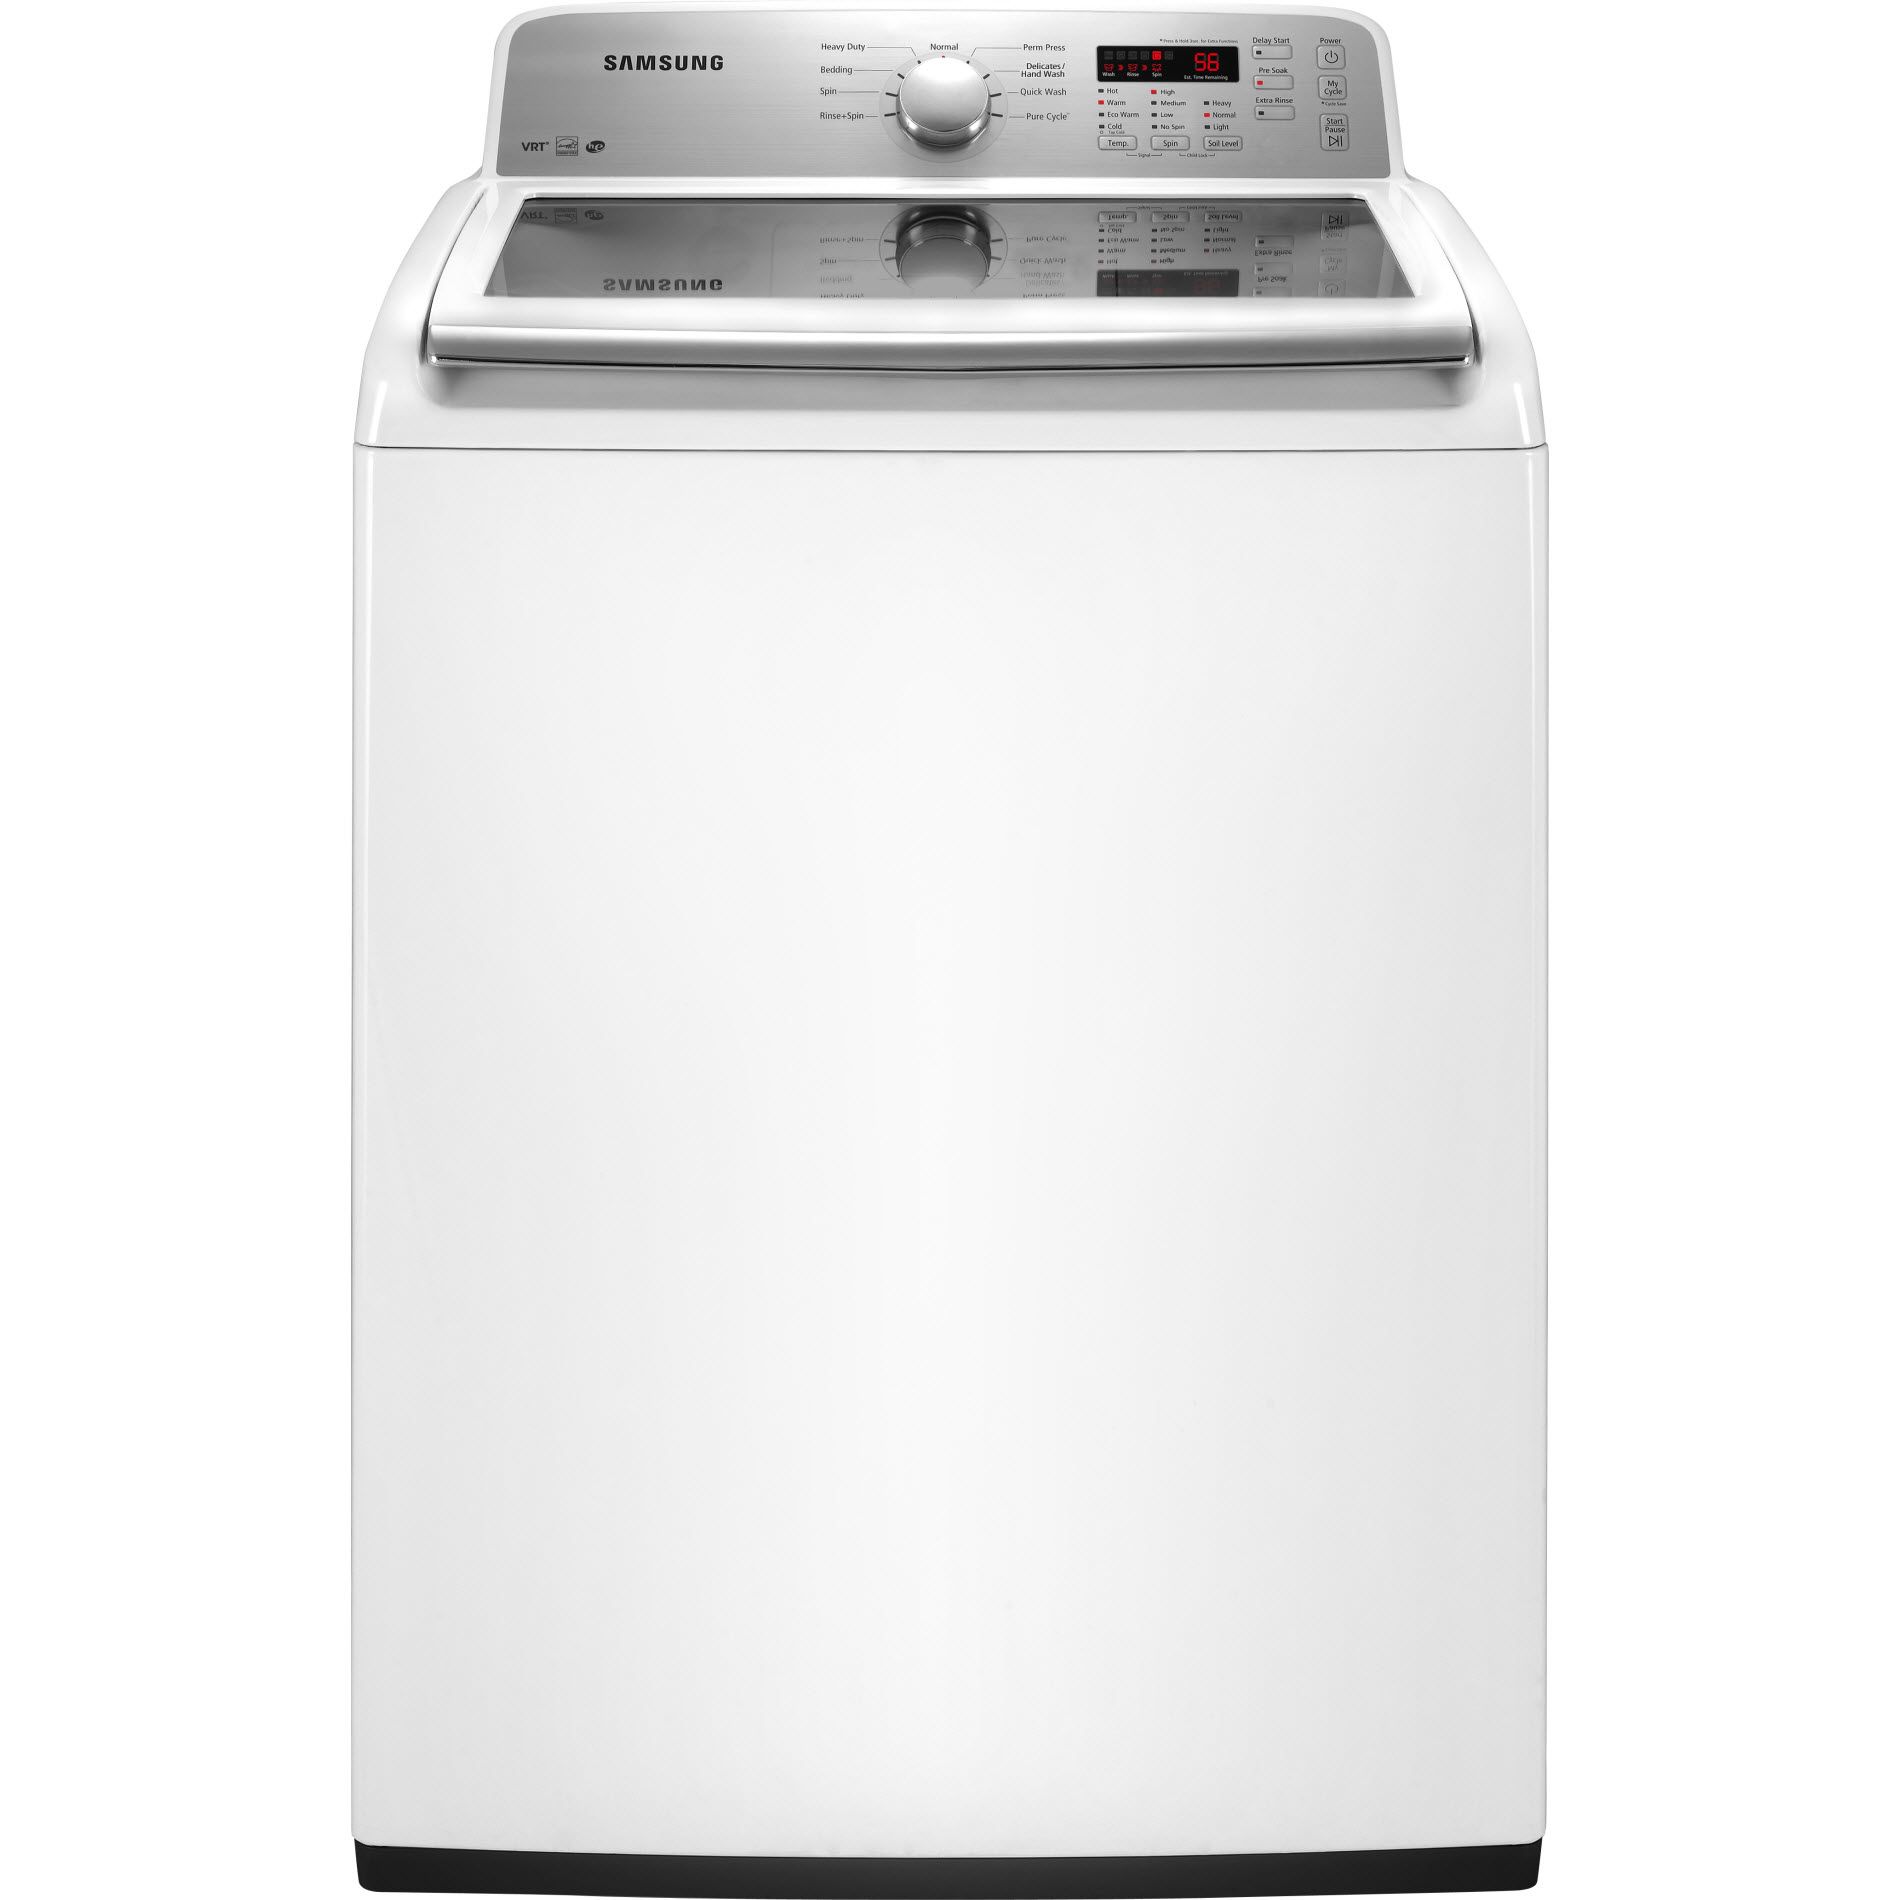 samsung-top-load-selfclean-wa45n3050aw-27-inch-washer-with-front-load